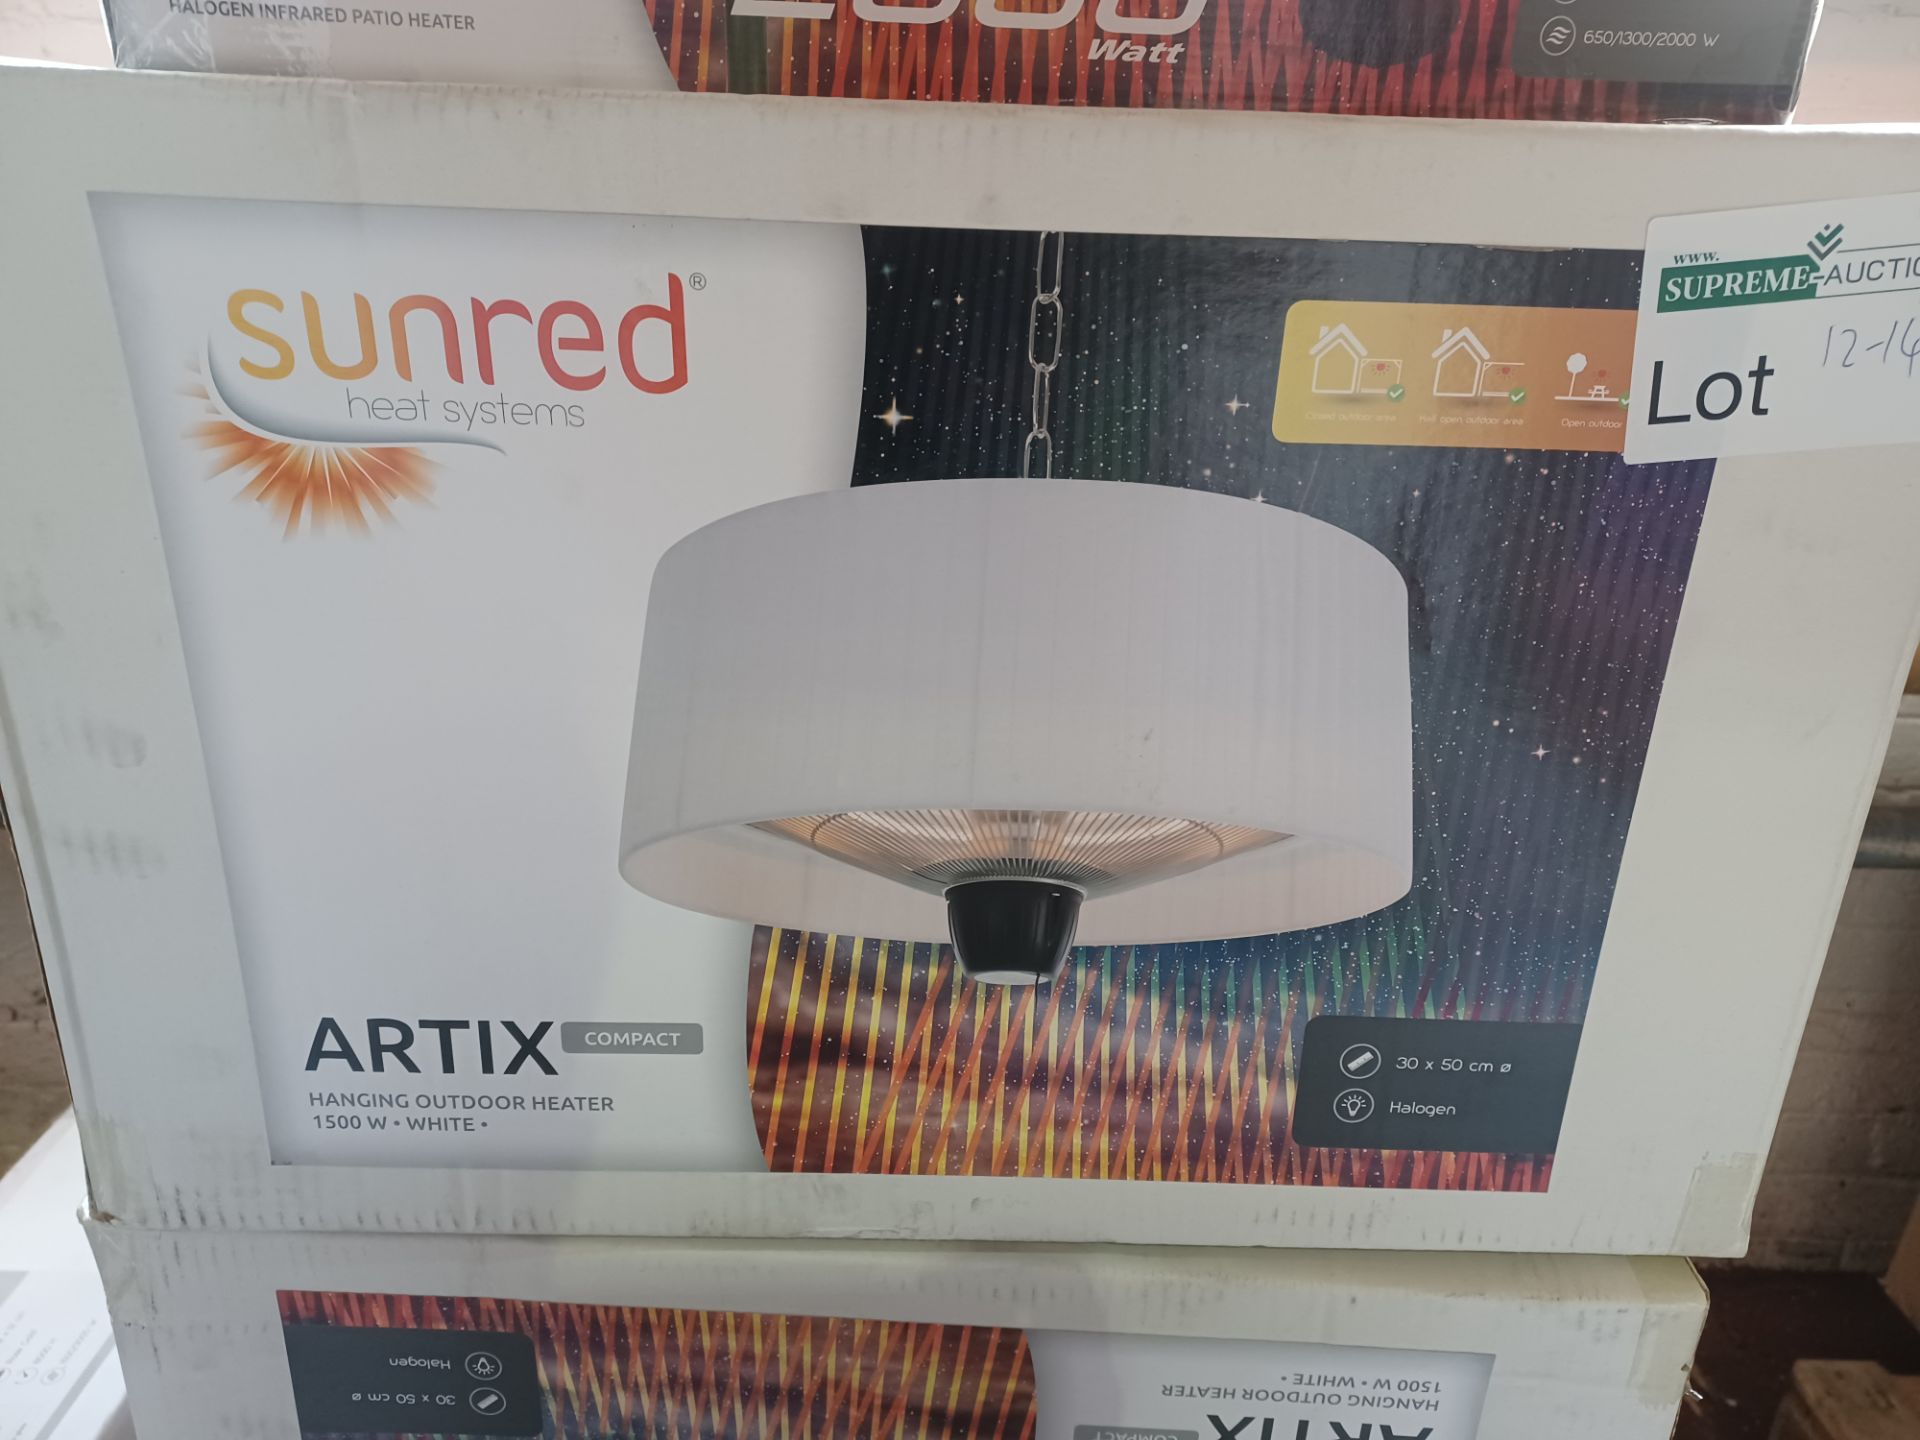 NEW BOXED SUNRED HEAT SYSTEMS ARTIX COMPACT HANGING OURDOOR HEATER. 1500W. WHITE. ROW 15 B/W